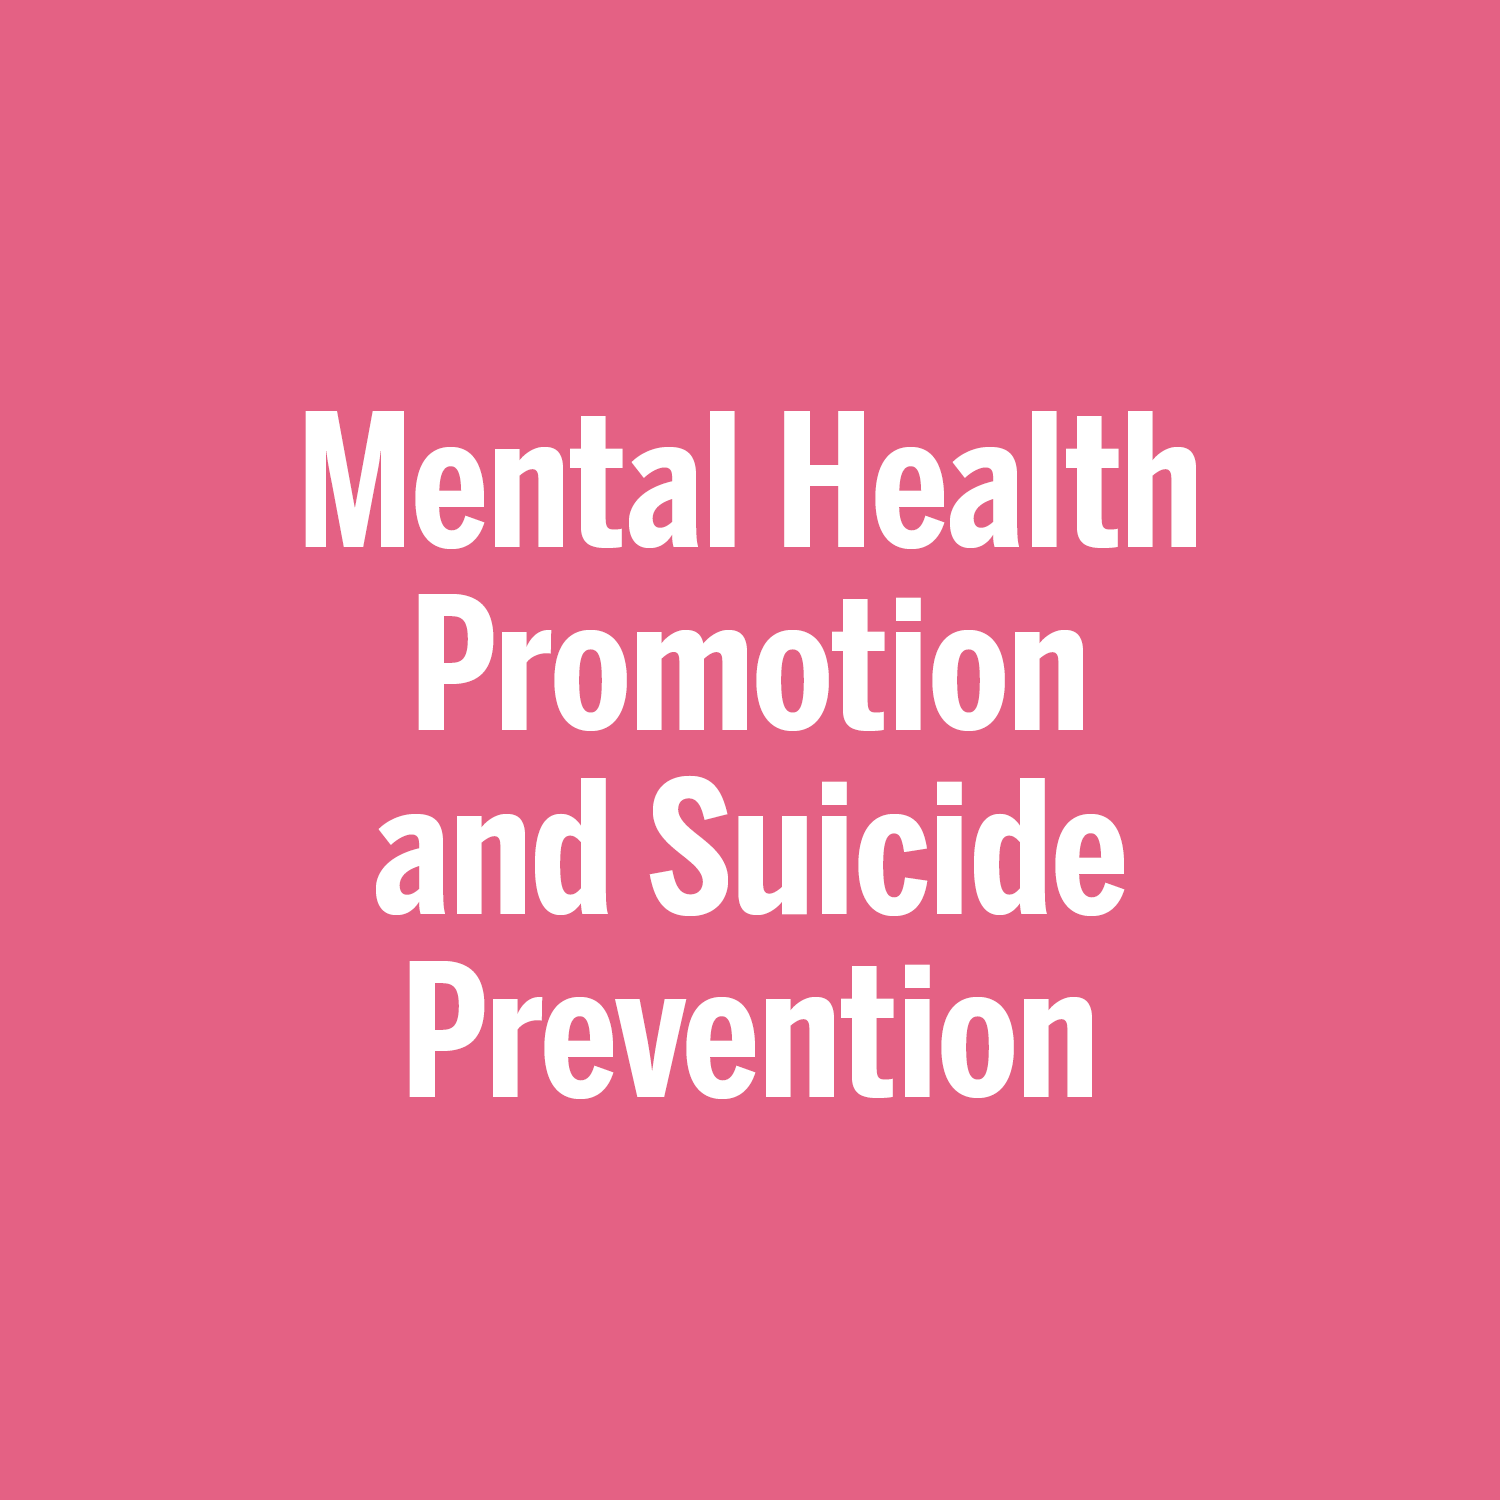 Mental Health Promotion and Suicide Prevention